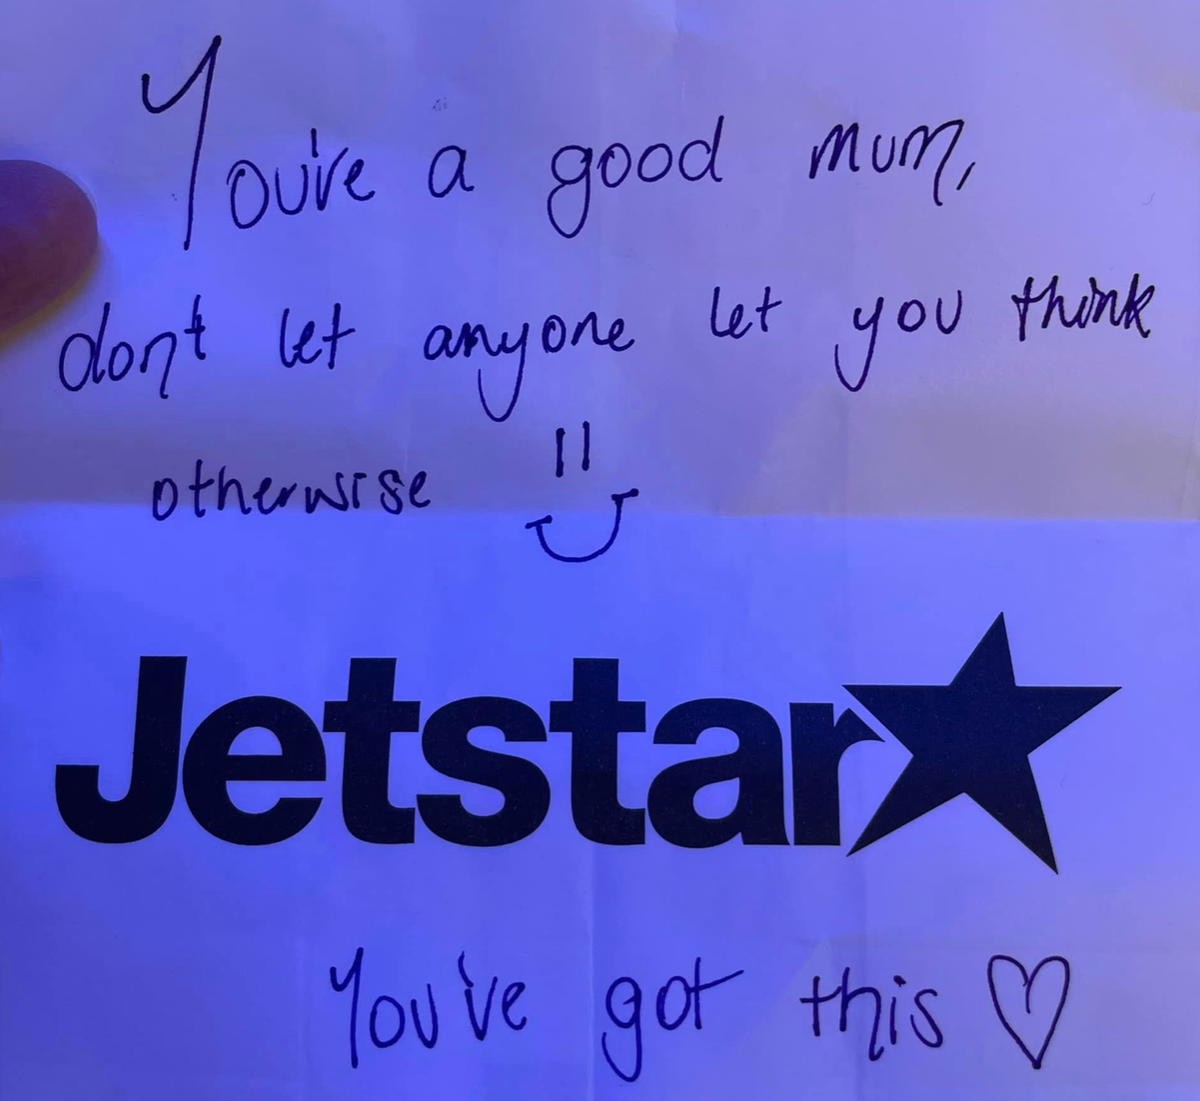 Stranger writes supportive note to mum flying alone with two kids